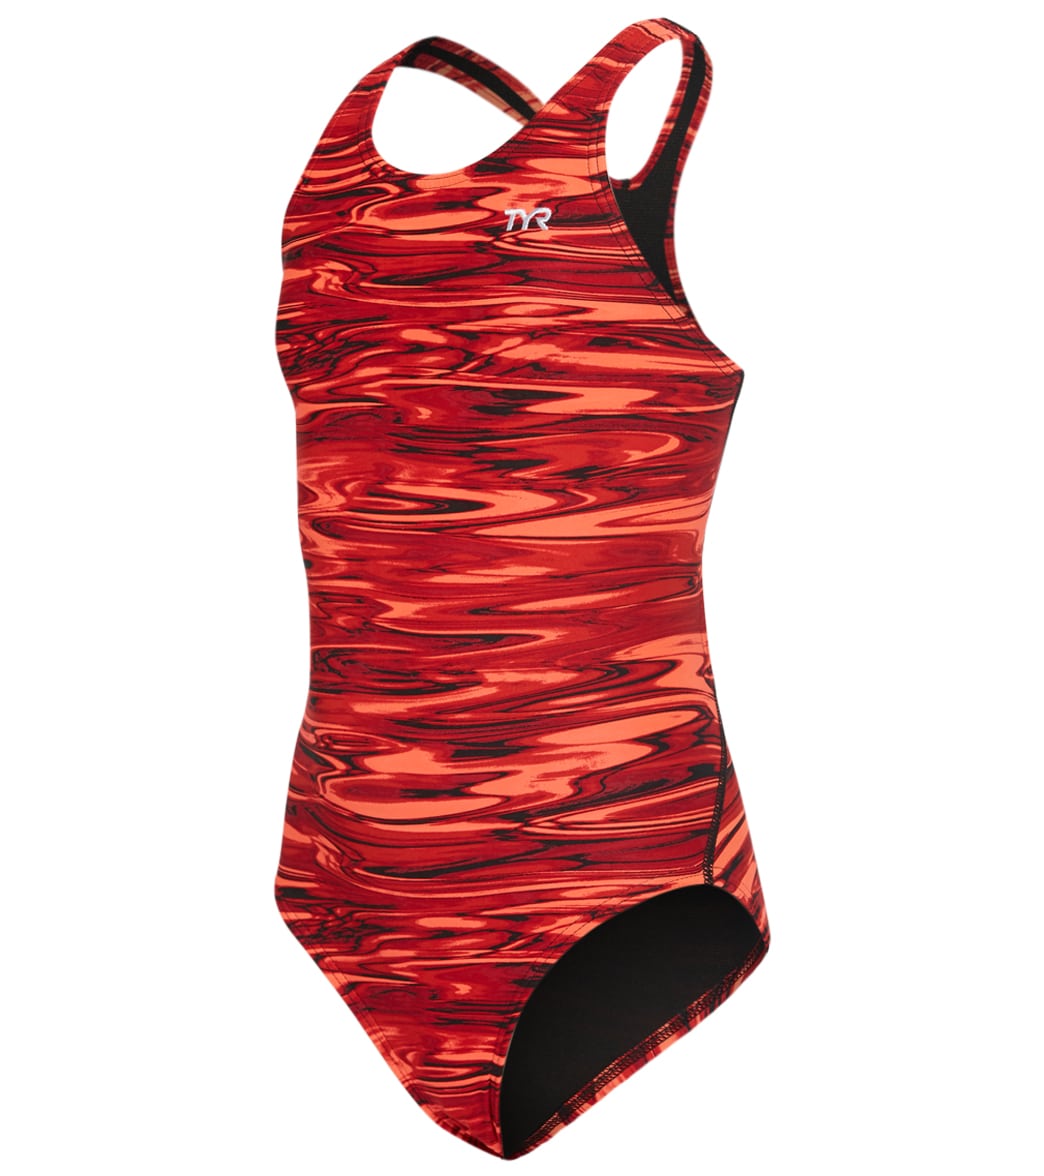 TYR Girls' Hydra Maxfit One Piece Swimsuit - Red 22 - Swimoutlet.com